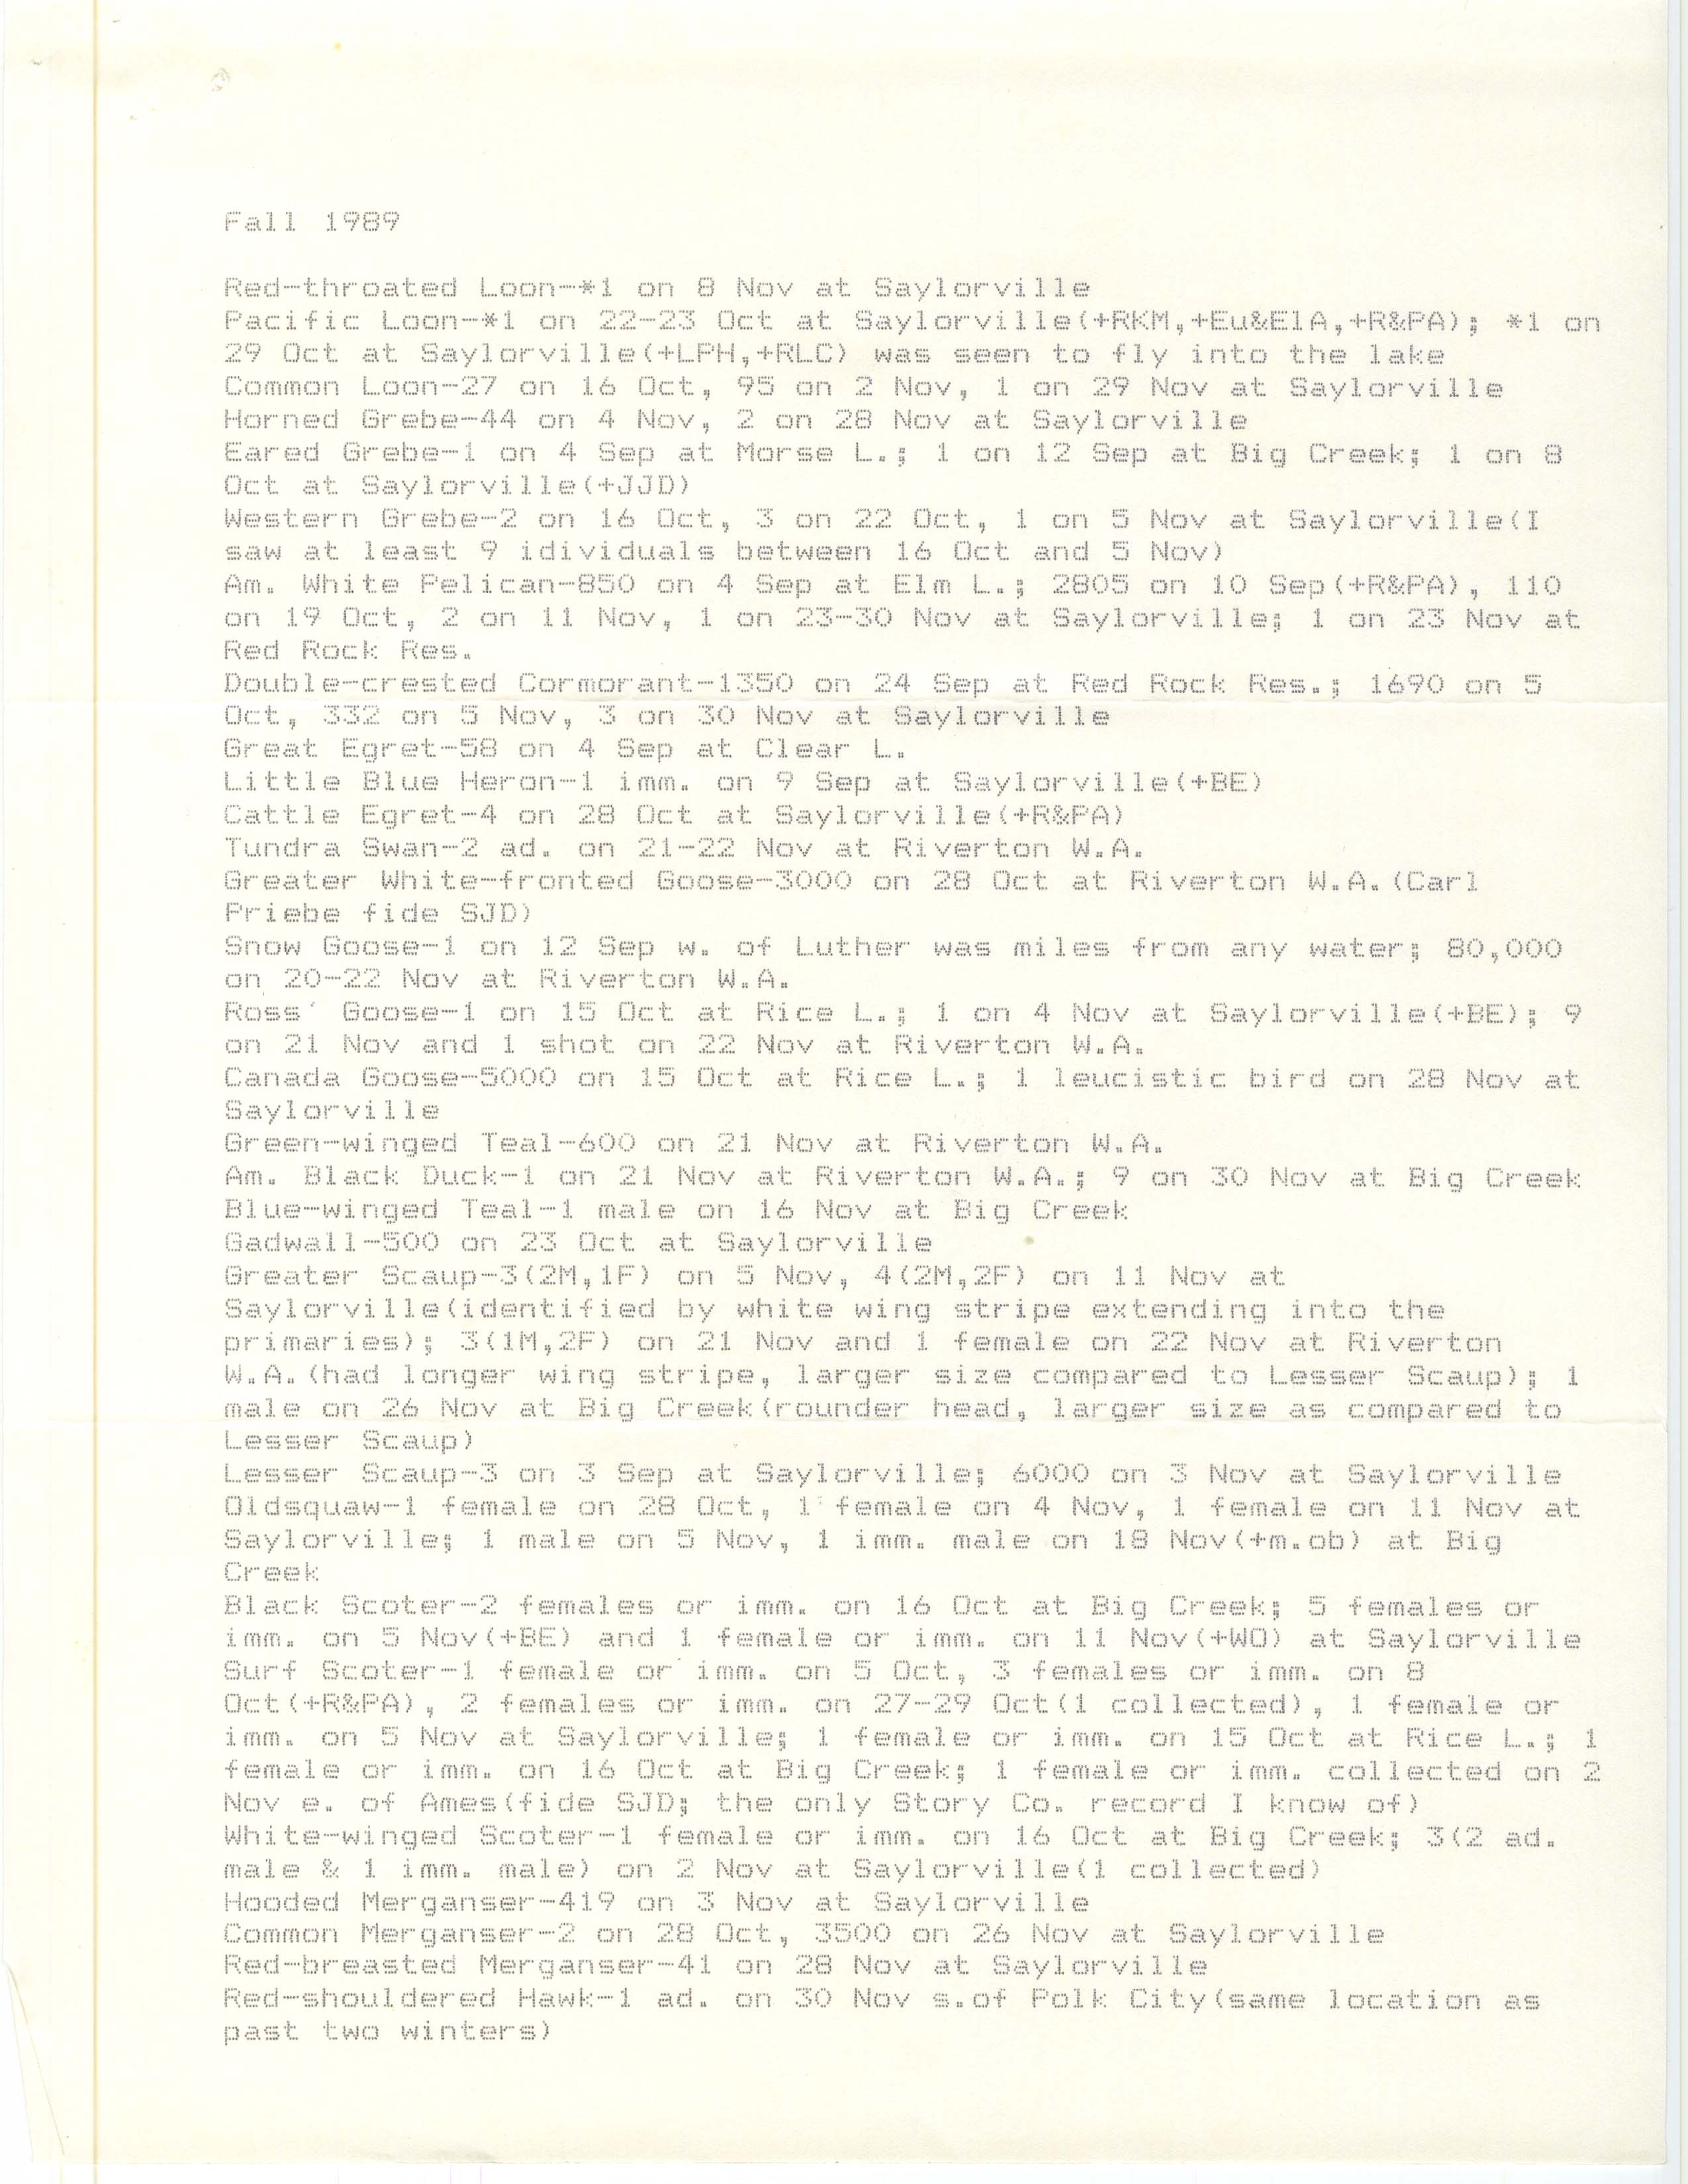 Field reports, several observers, fall 1989